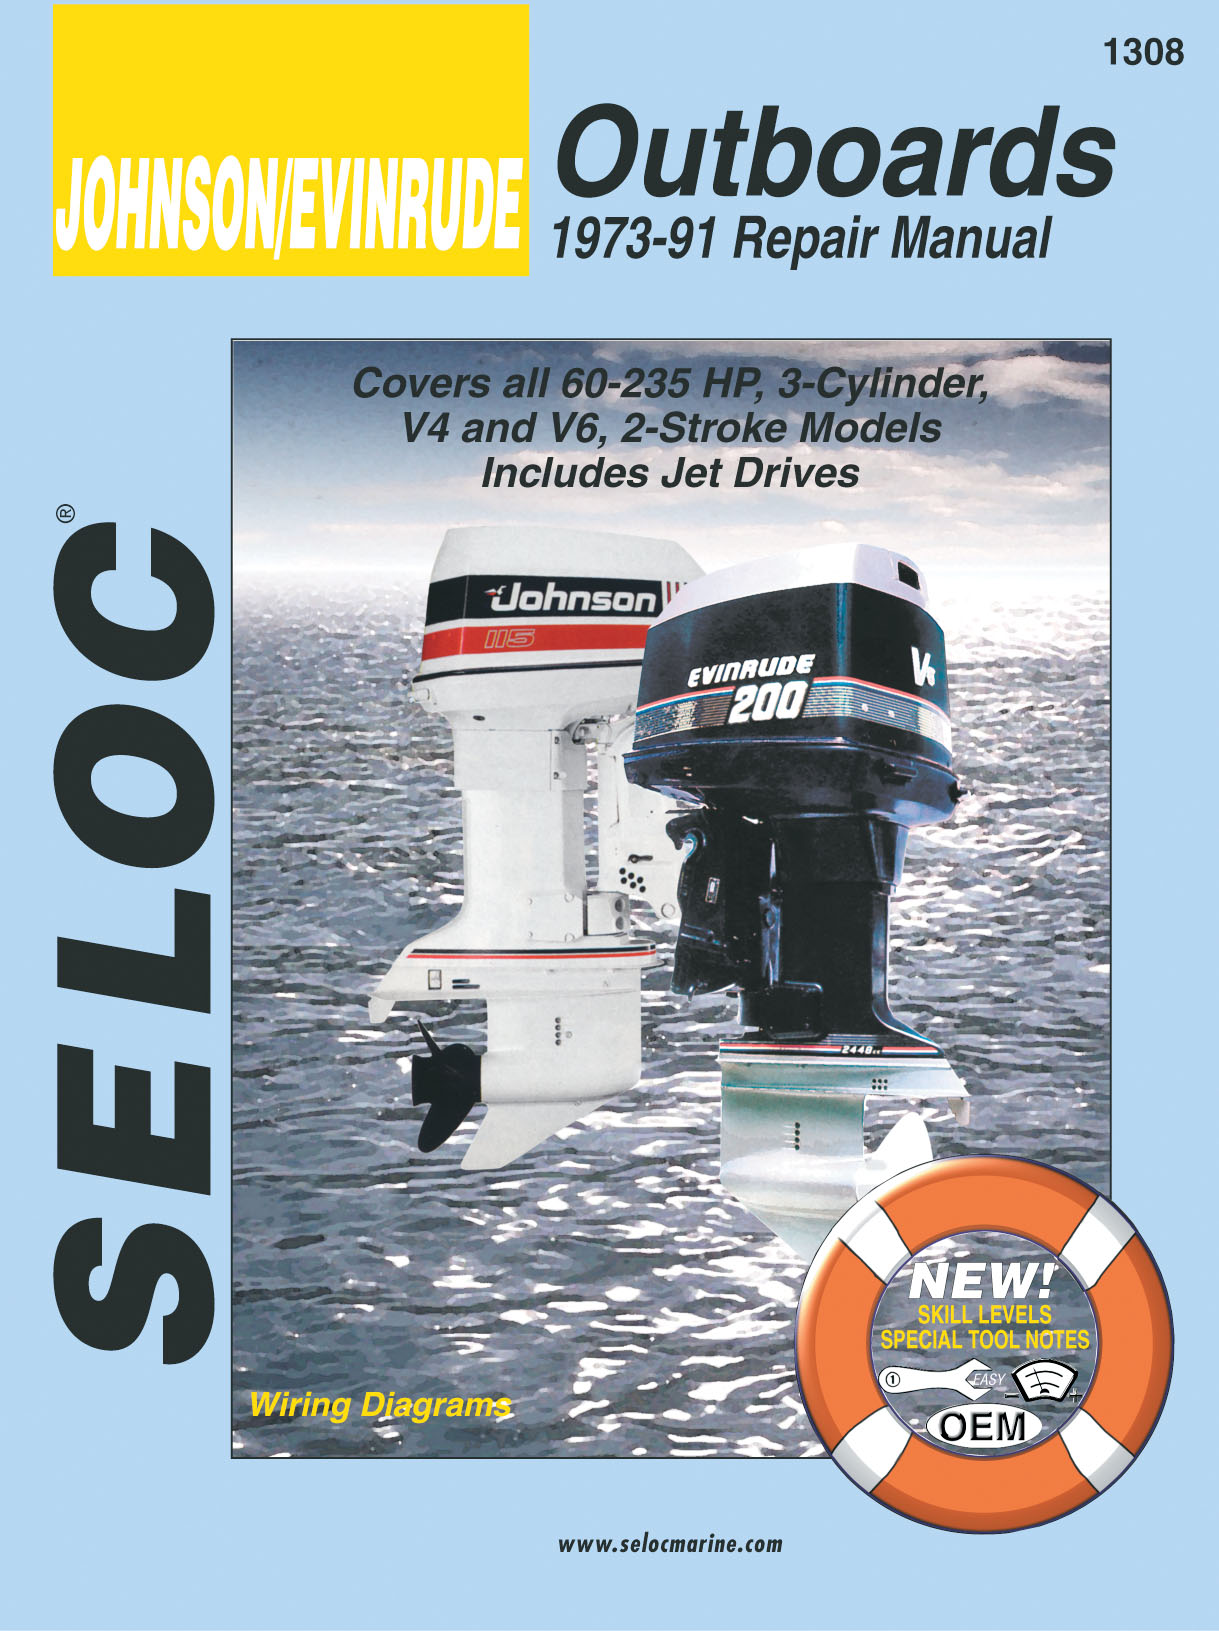 Johnson Evinrude Outboards, 3-6 Cylinder, 1973-1991 Repair Manual